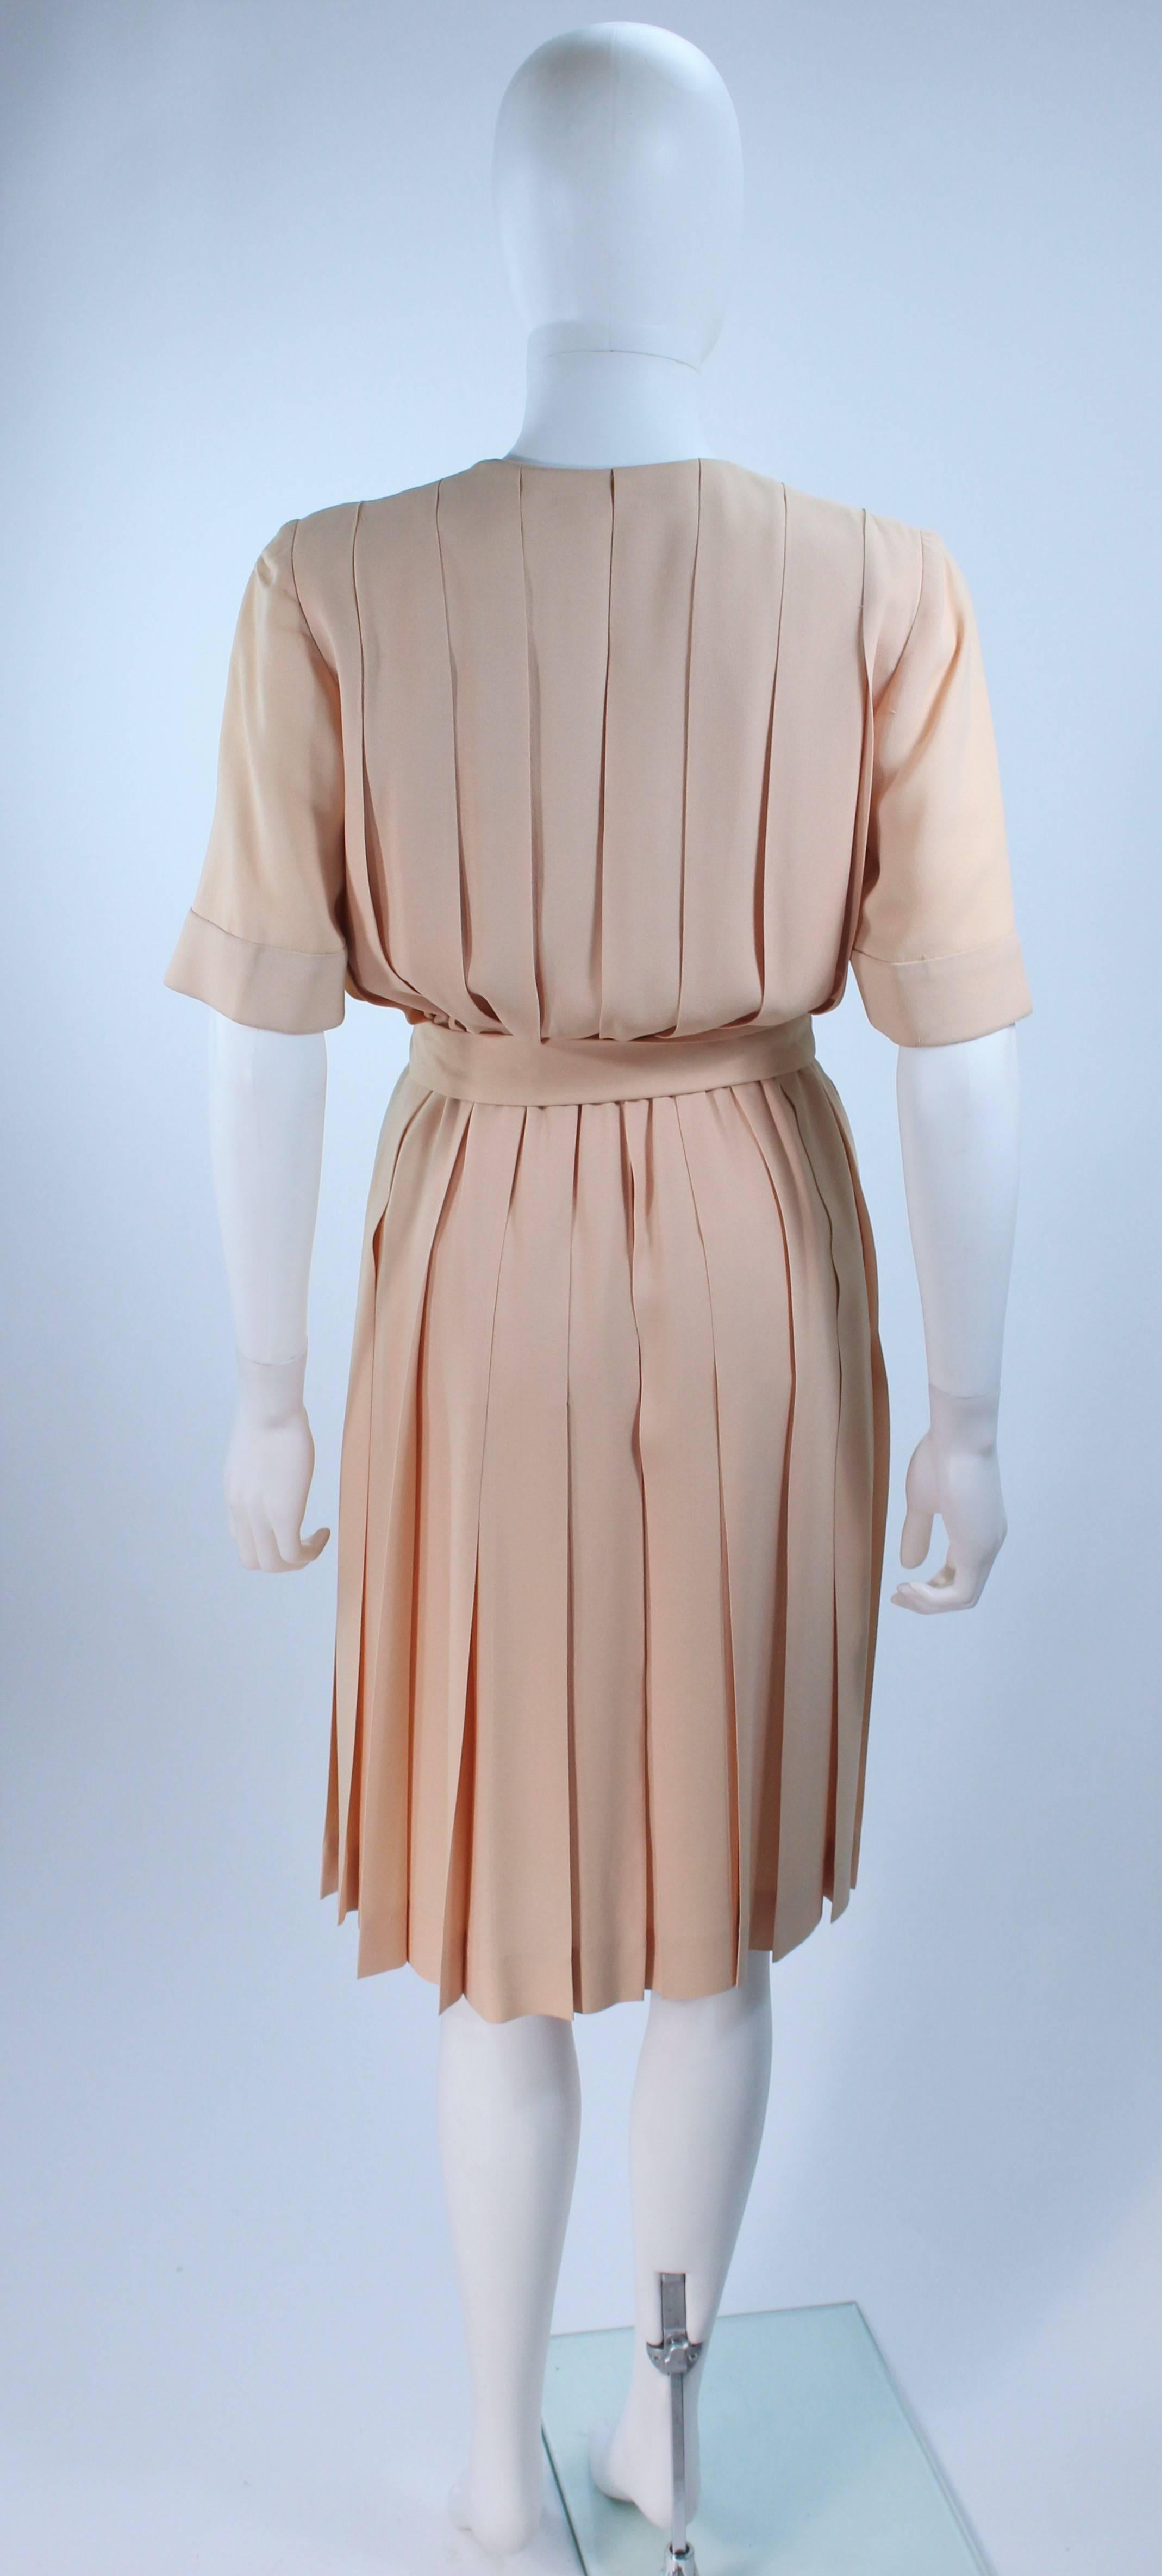 GIVENCHY COUTURE Cream Ivory Silk Wrap Dress Size 2 For Sale 1